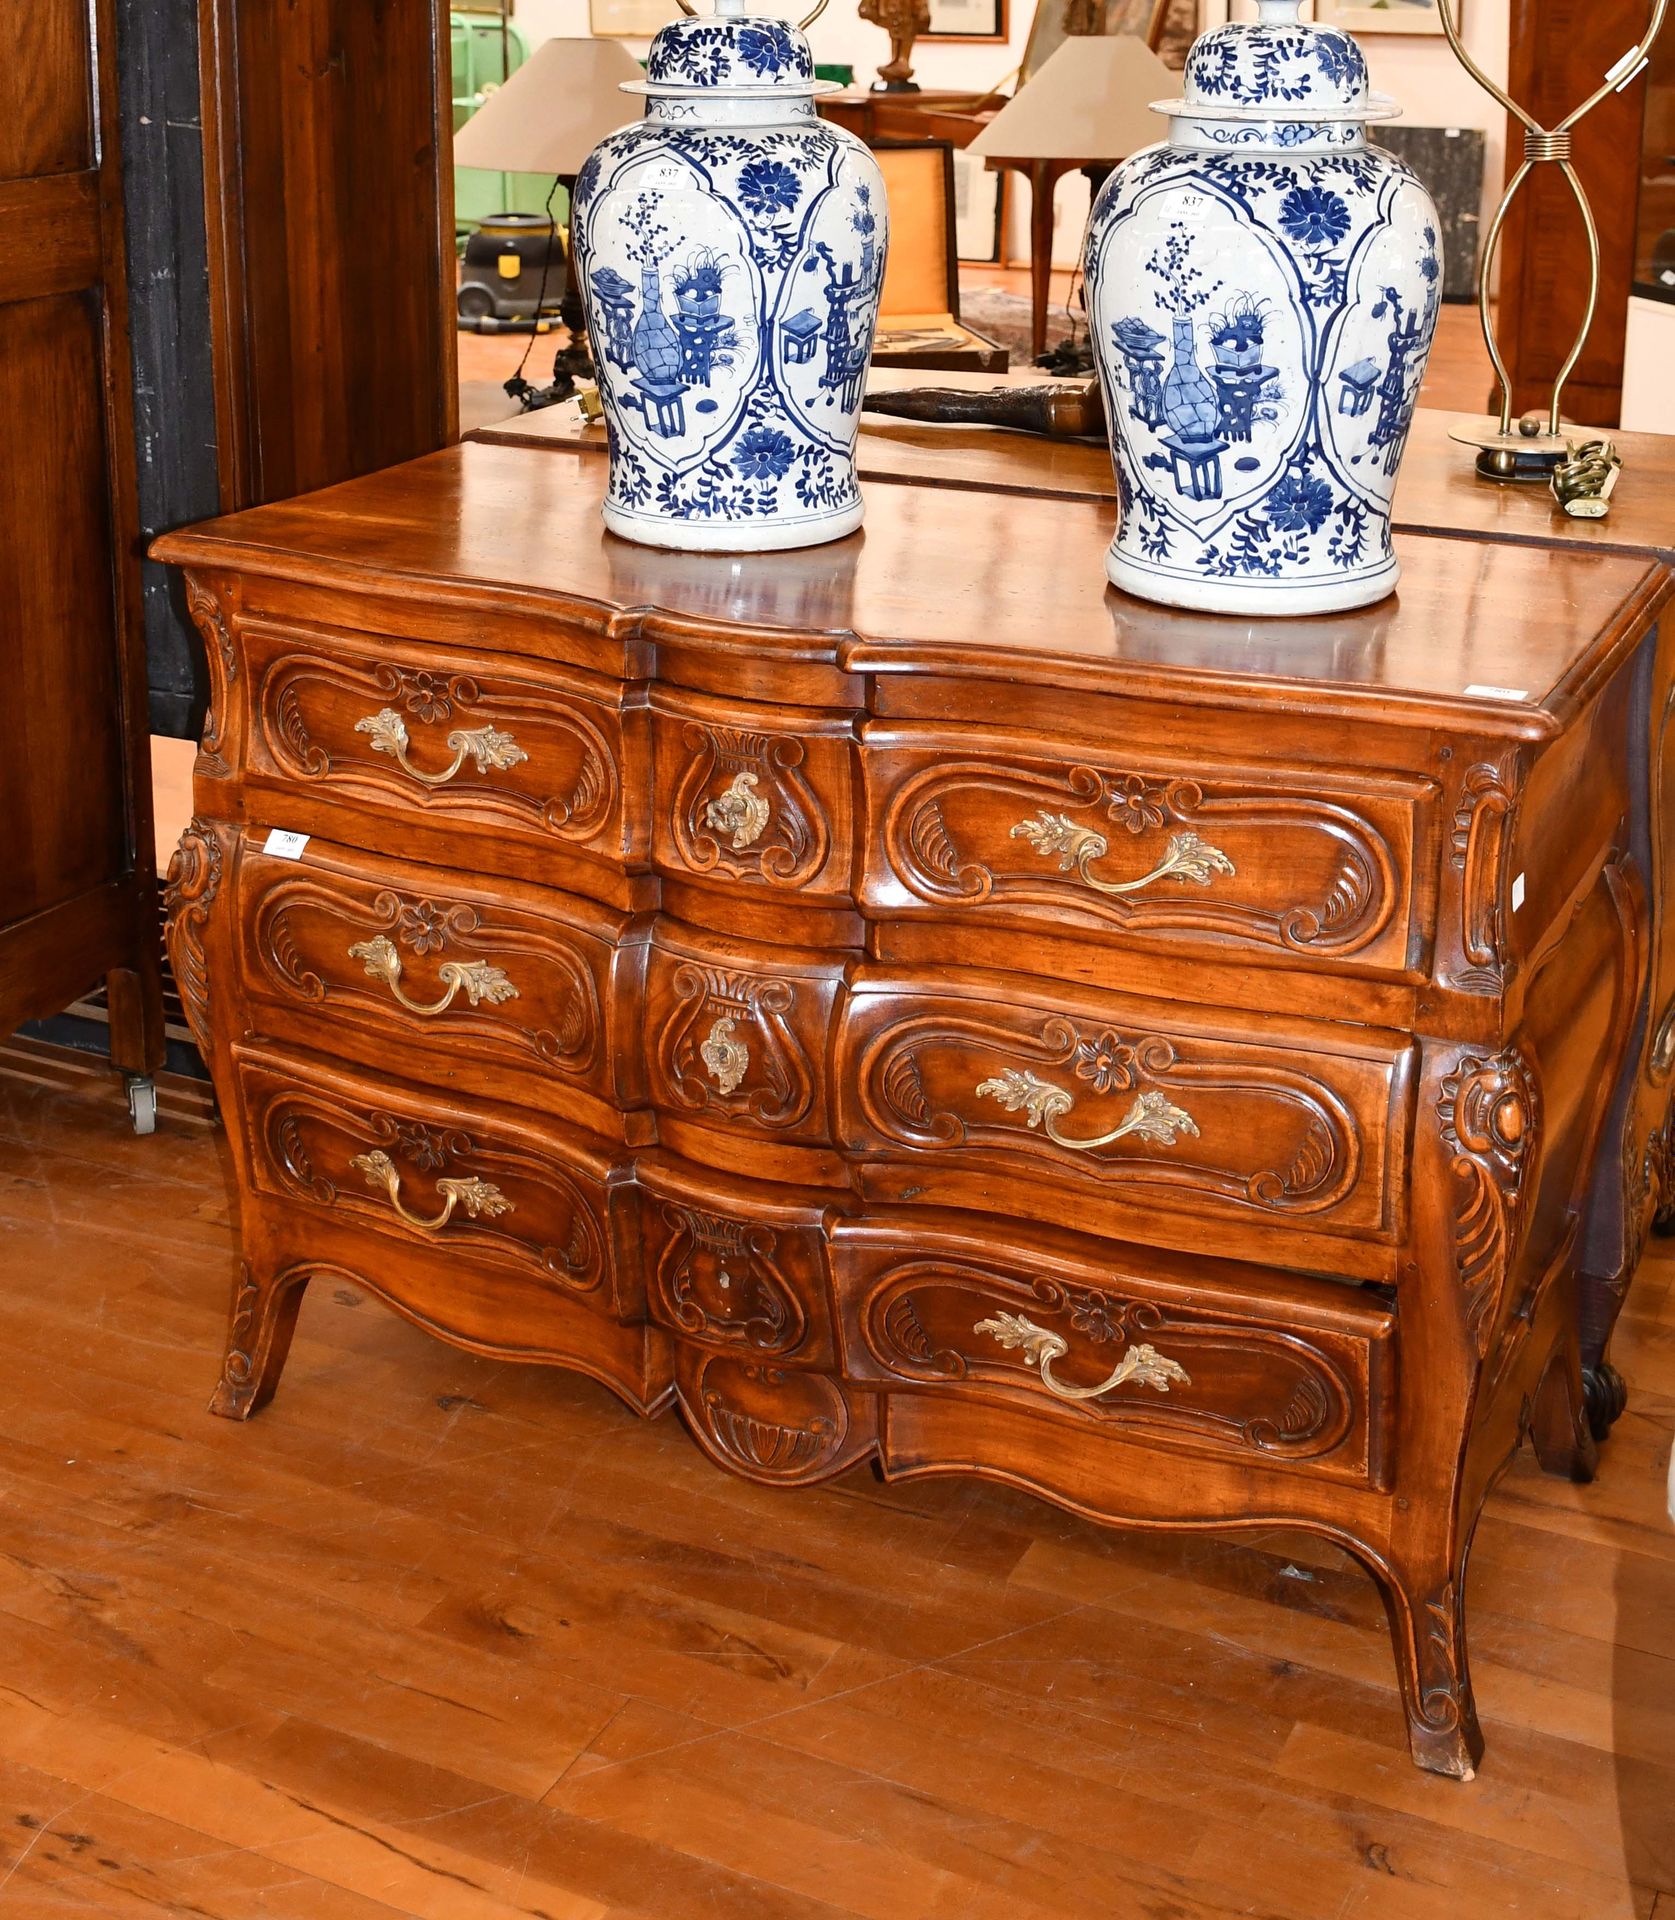 Null French style curved chest of drawers in fruitwood with three drawers

Lengt&hellip;